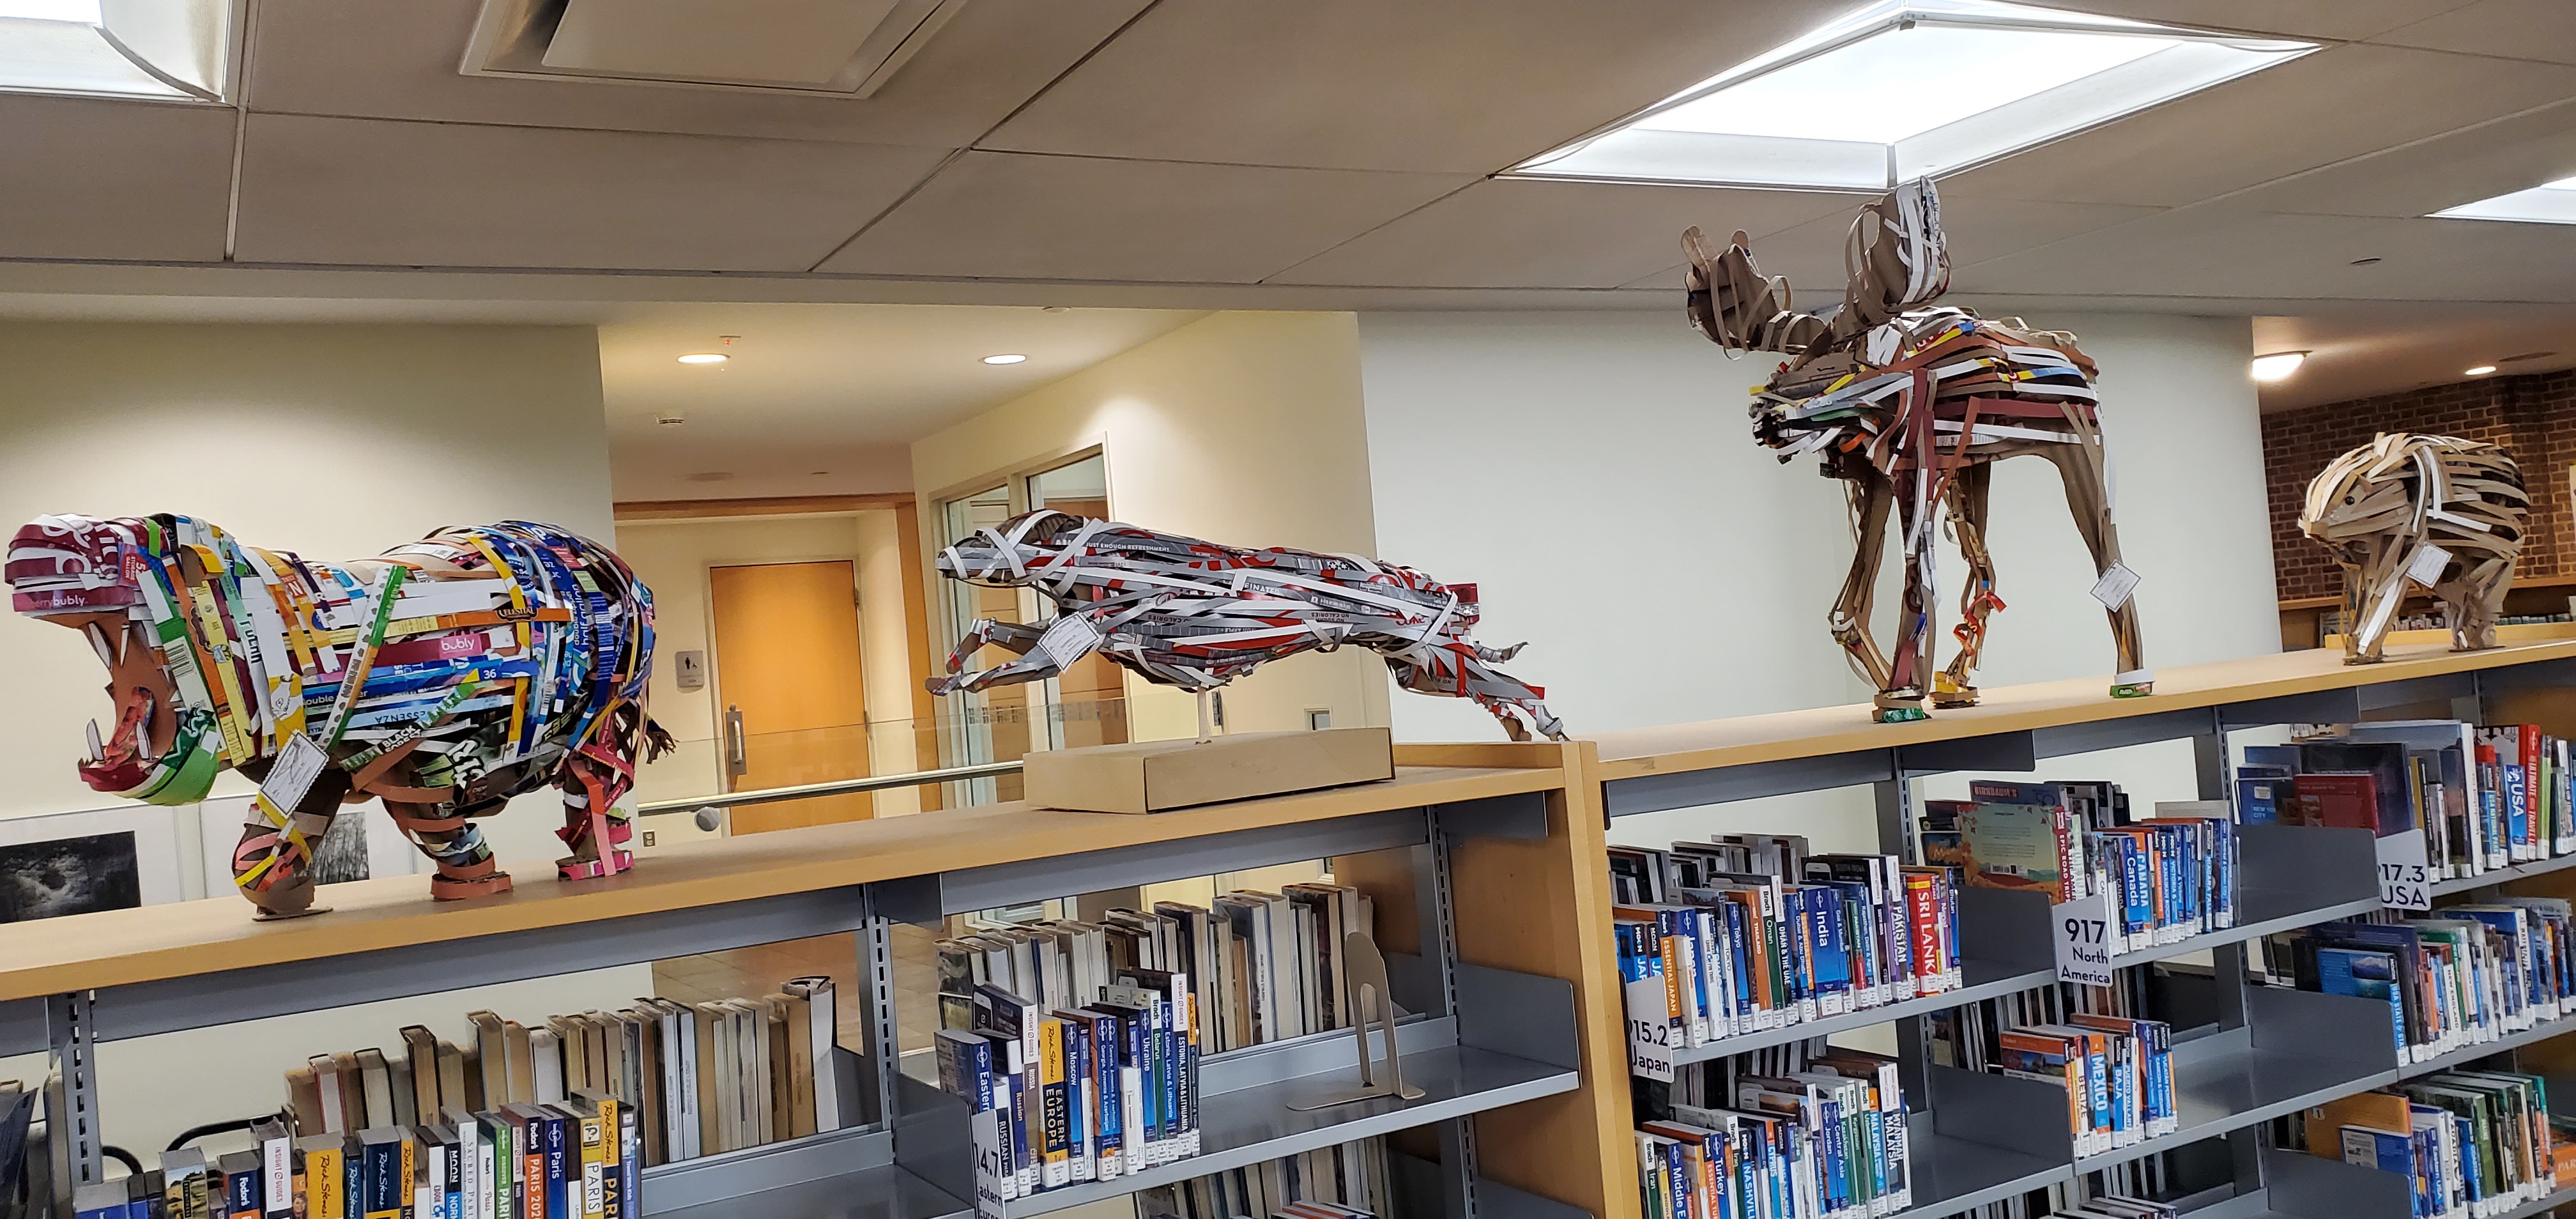 cardboard animals in library